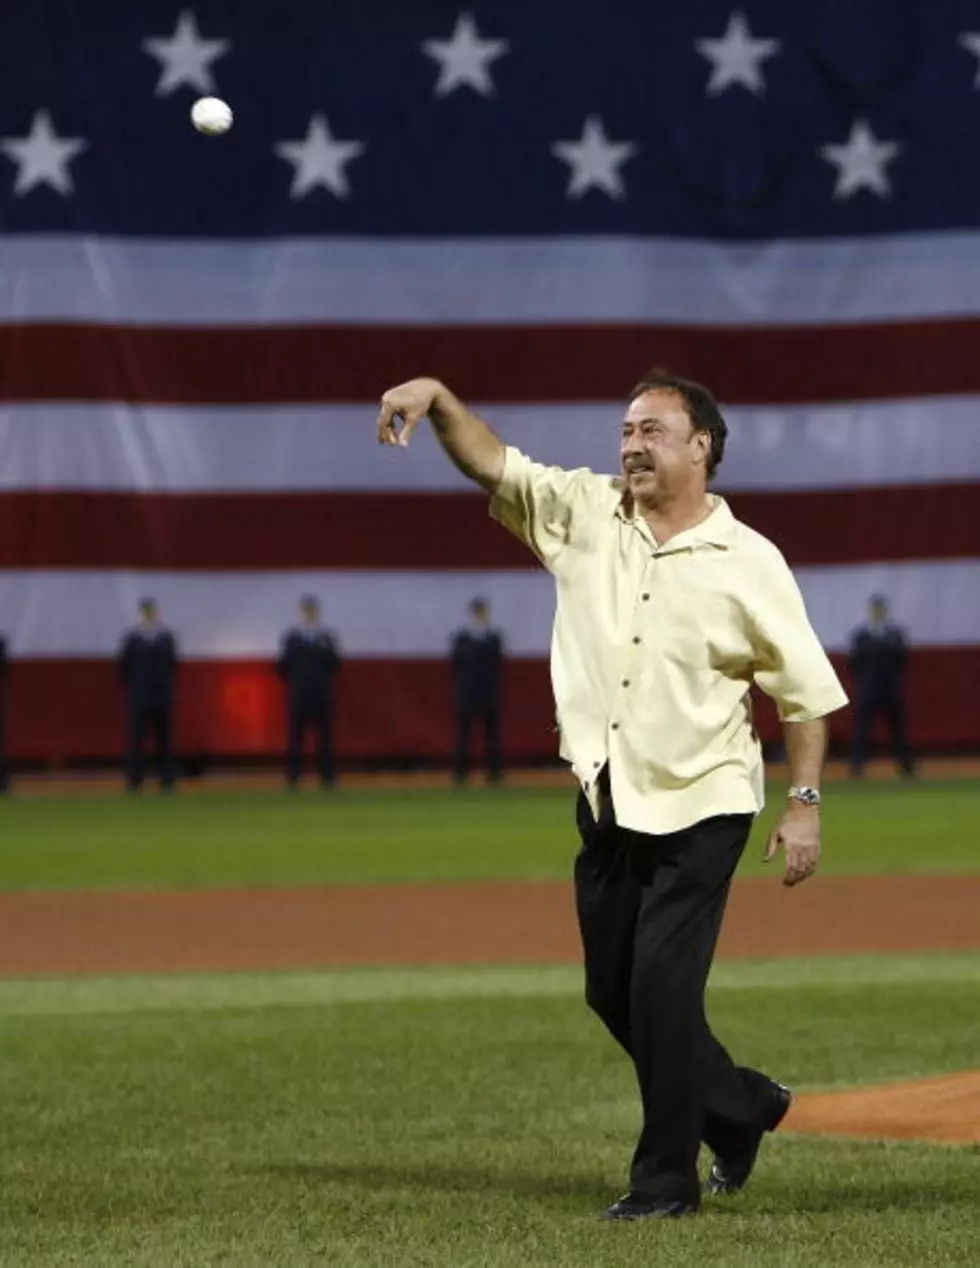 Jerry Remy Will Sit Out Rest Of Red Sox Season